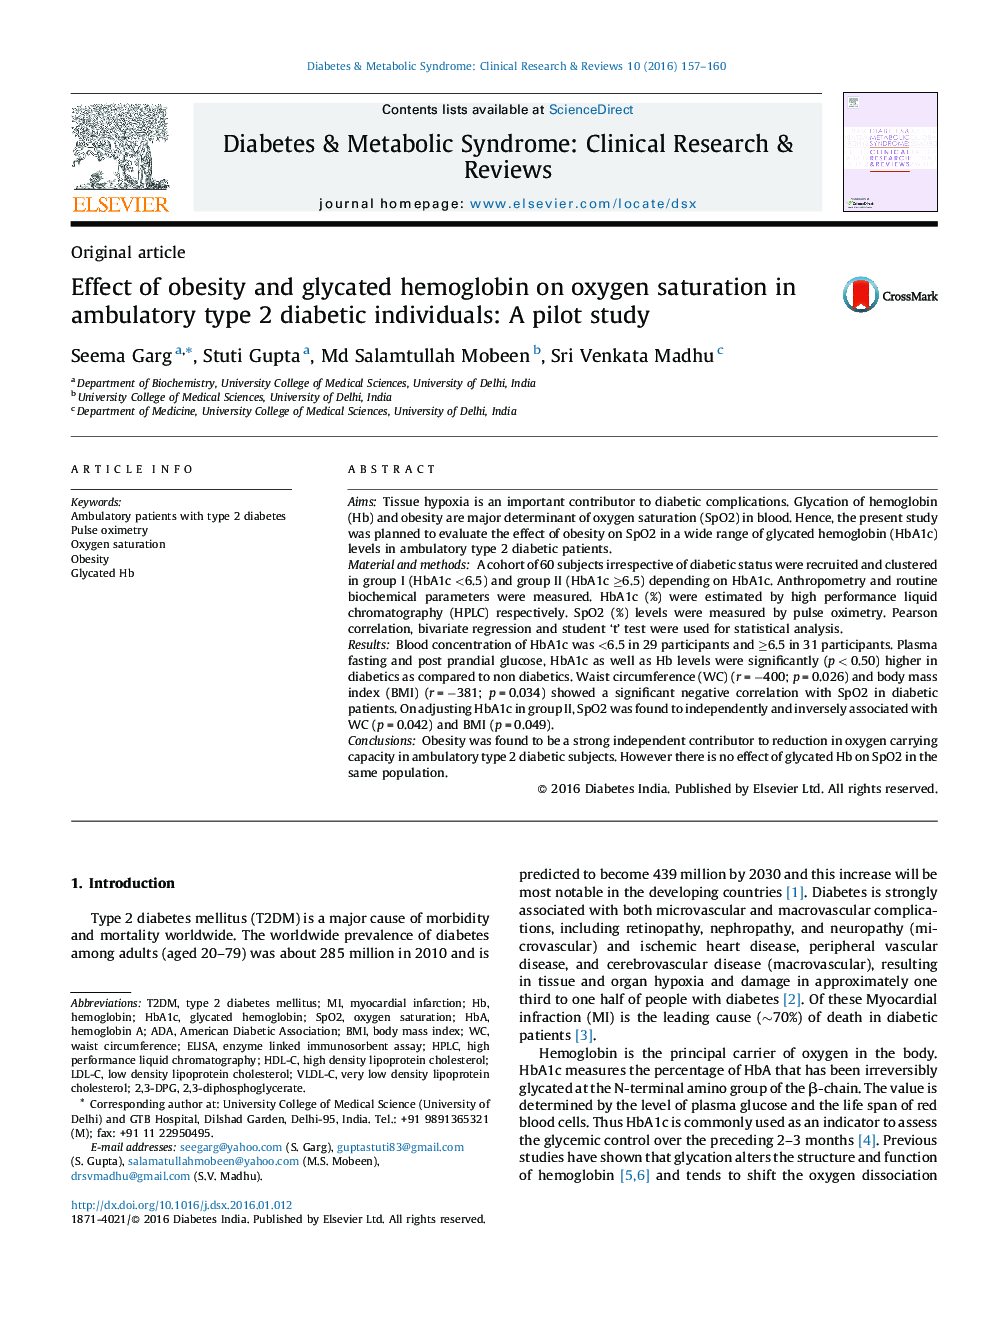 Effect of obesity and glycated hemoglobin on oxygen saturation in ambulatory type 2 diabetic individuals: A pilot study